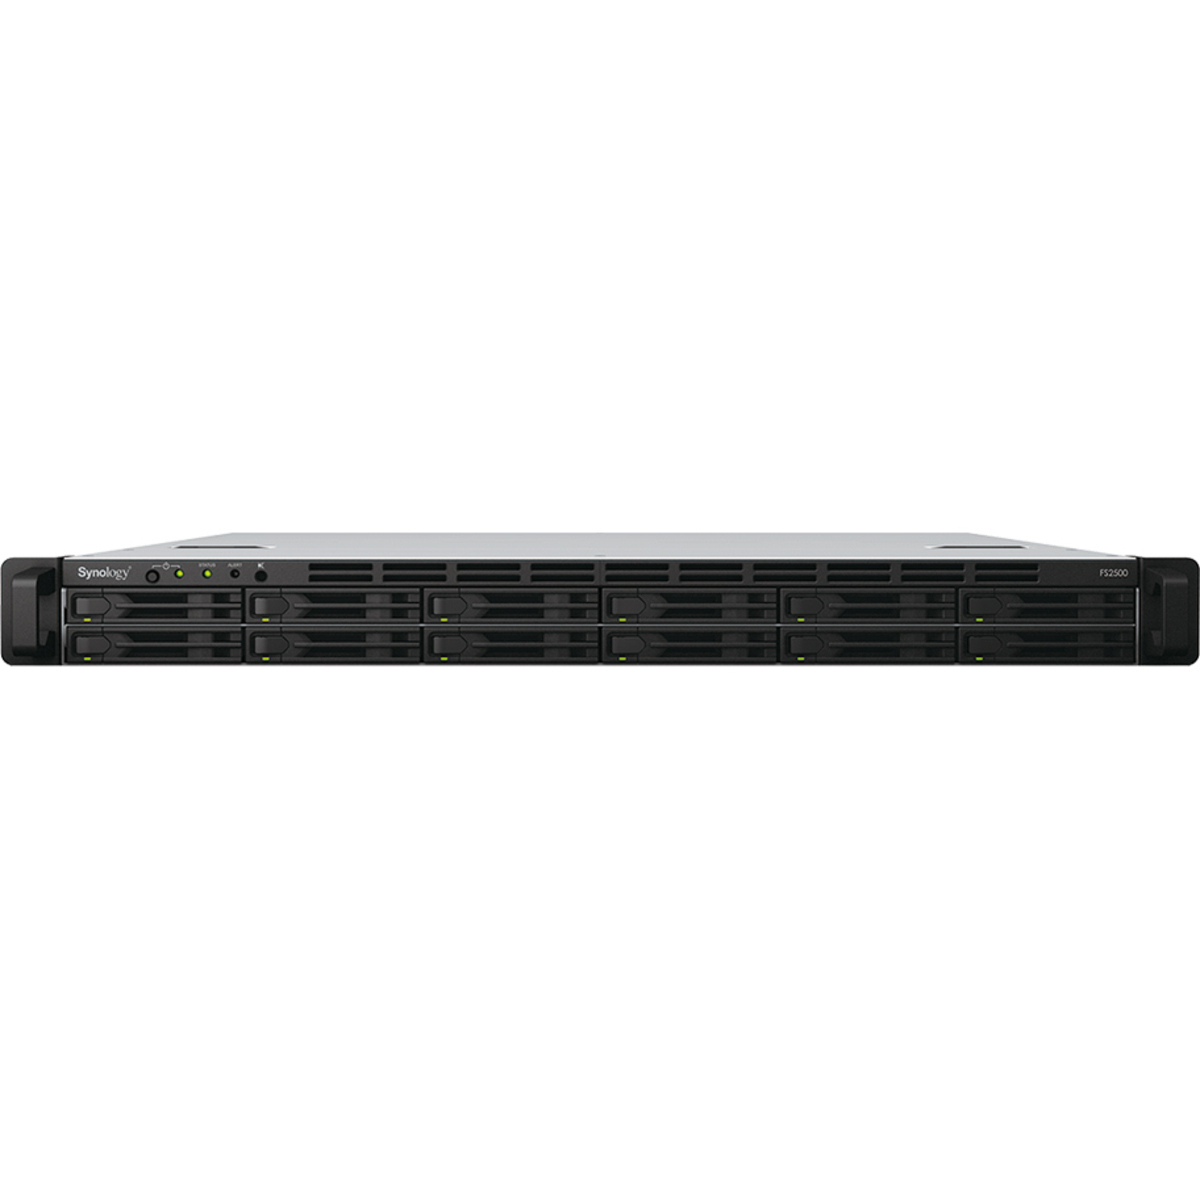 Synology FlashStation FS2500 36tb 12-Bay RackMount Large Business / Enterprise NAS - Network Attached Storage Device 9x4tb Samsung 870 QVO MZ-77Q4T0 2.5 560/530MB/s SATA 6Gb/s SSD CONSUMER Class Drives Installed - Burn-In Tested - FREE RAM UPGRADE FlashStation FS2500